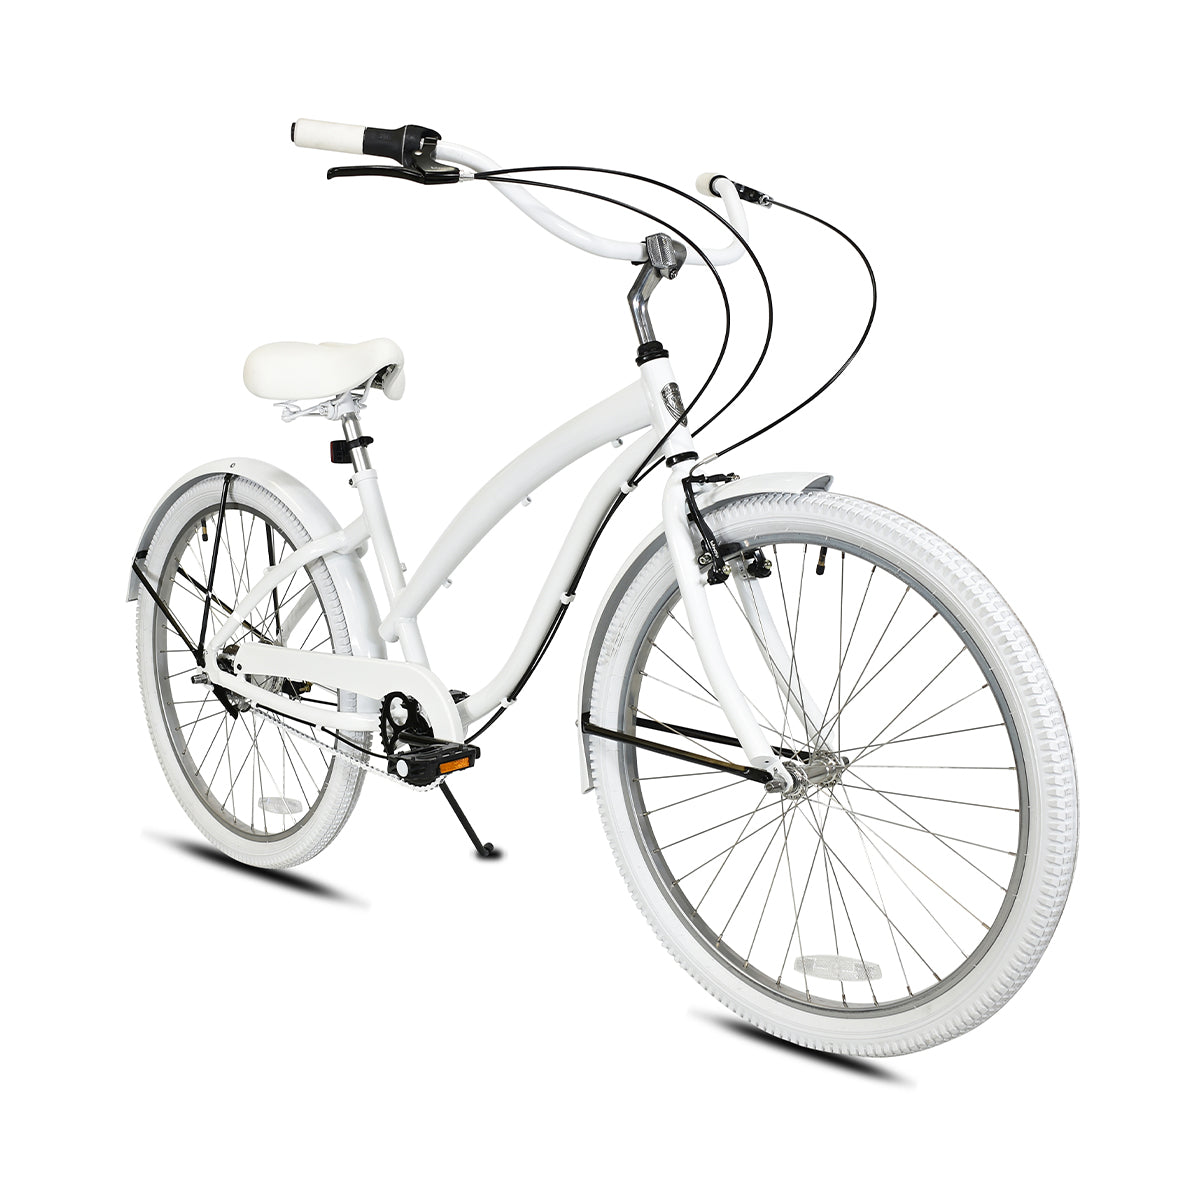 Elise 3-Speed Cruiser with White Step-Thru Frame, Handlebar, Saddle, Chain, Fenders, Grips, and Tires with Silver Stems, Chain, and Wheels and Black Pedals, Hand Brakes, Fender Braces, and Shifters